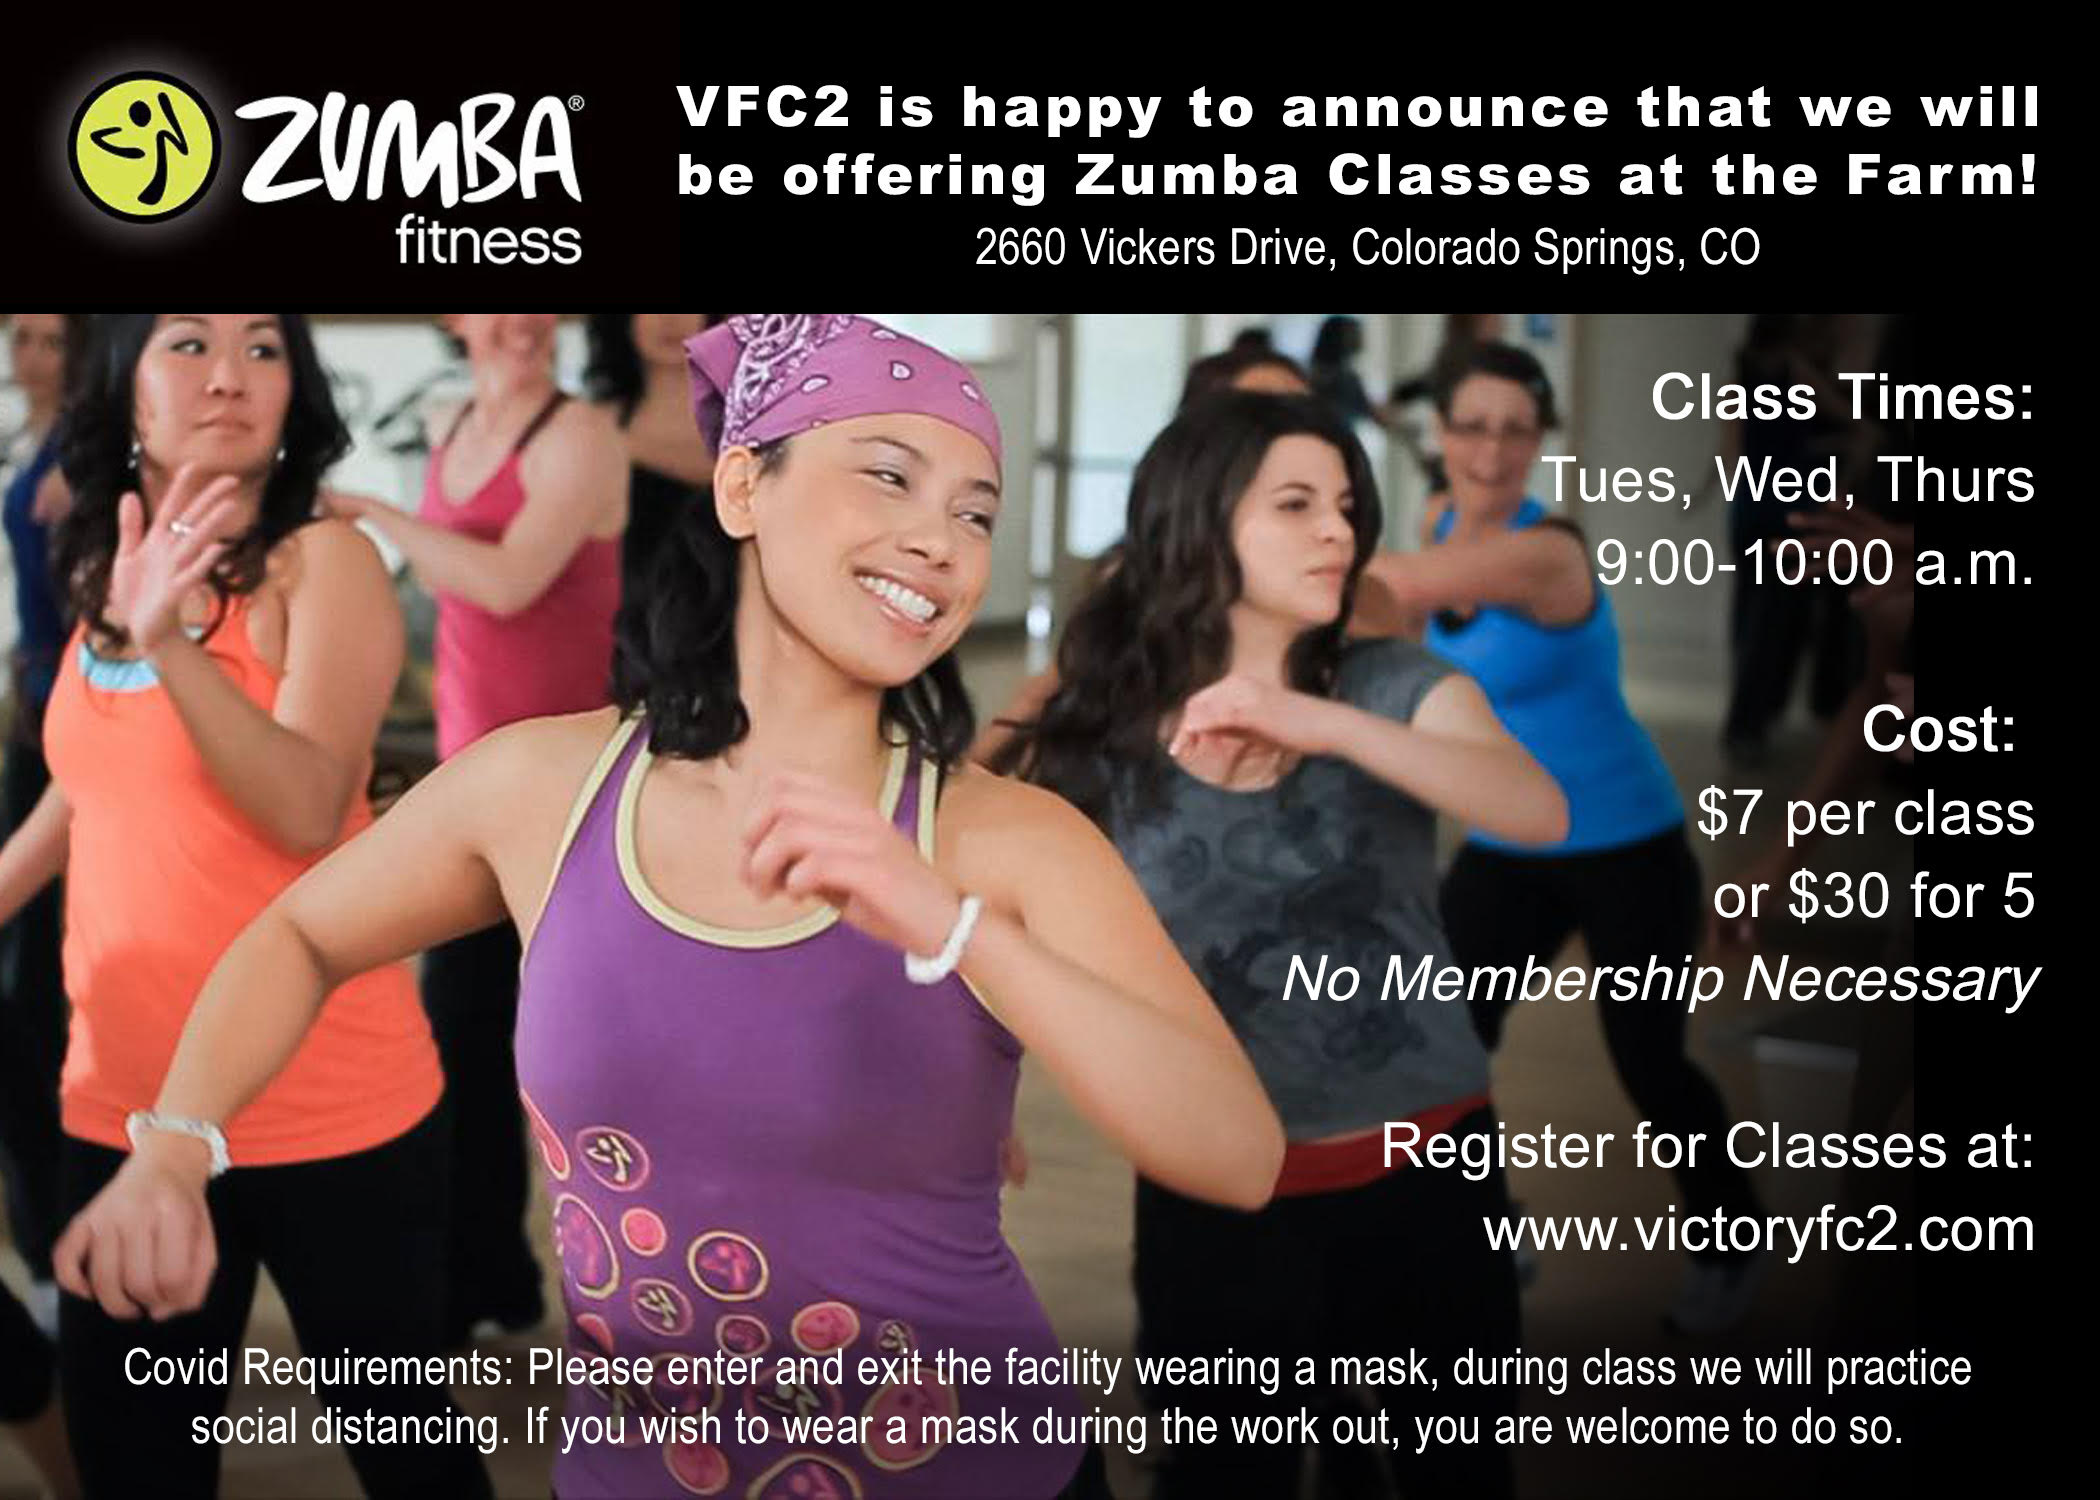 New Exercise Classes in Colorado Springs - Zumba